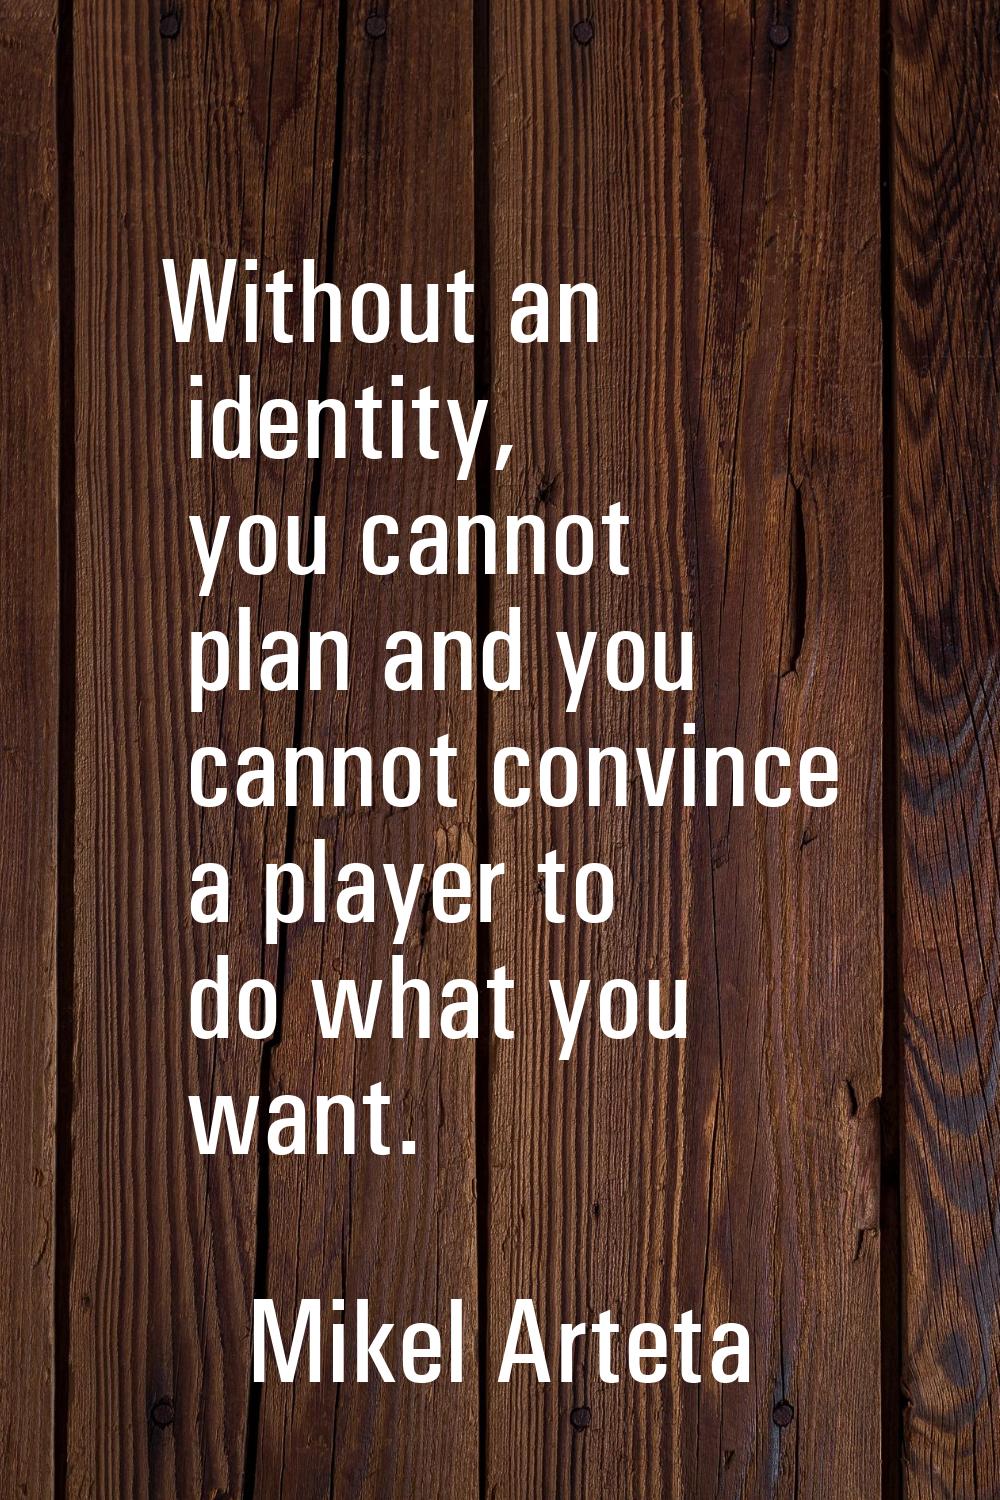 Without an identity, you cannot plan and you cannot convince a player to do what you want.